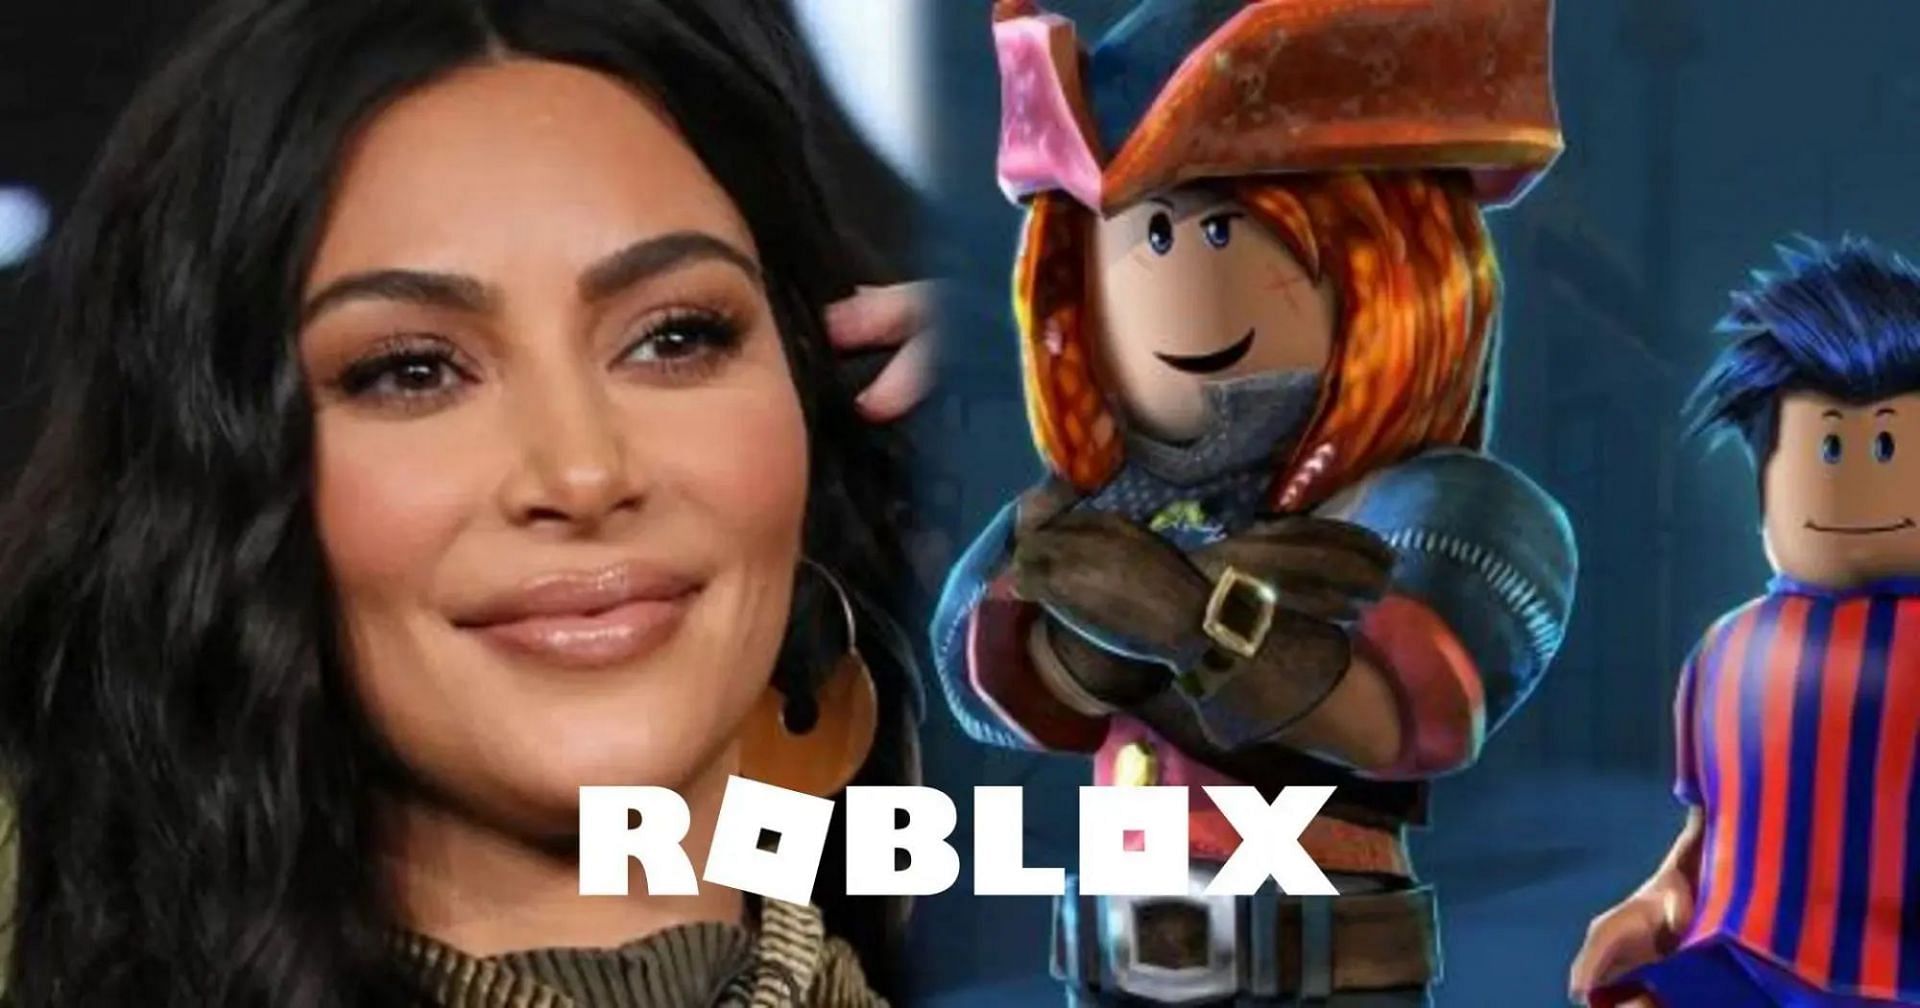 IGN - Kim Kardashian threatened to sue Roblox after a game